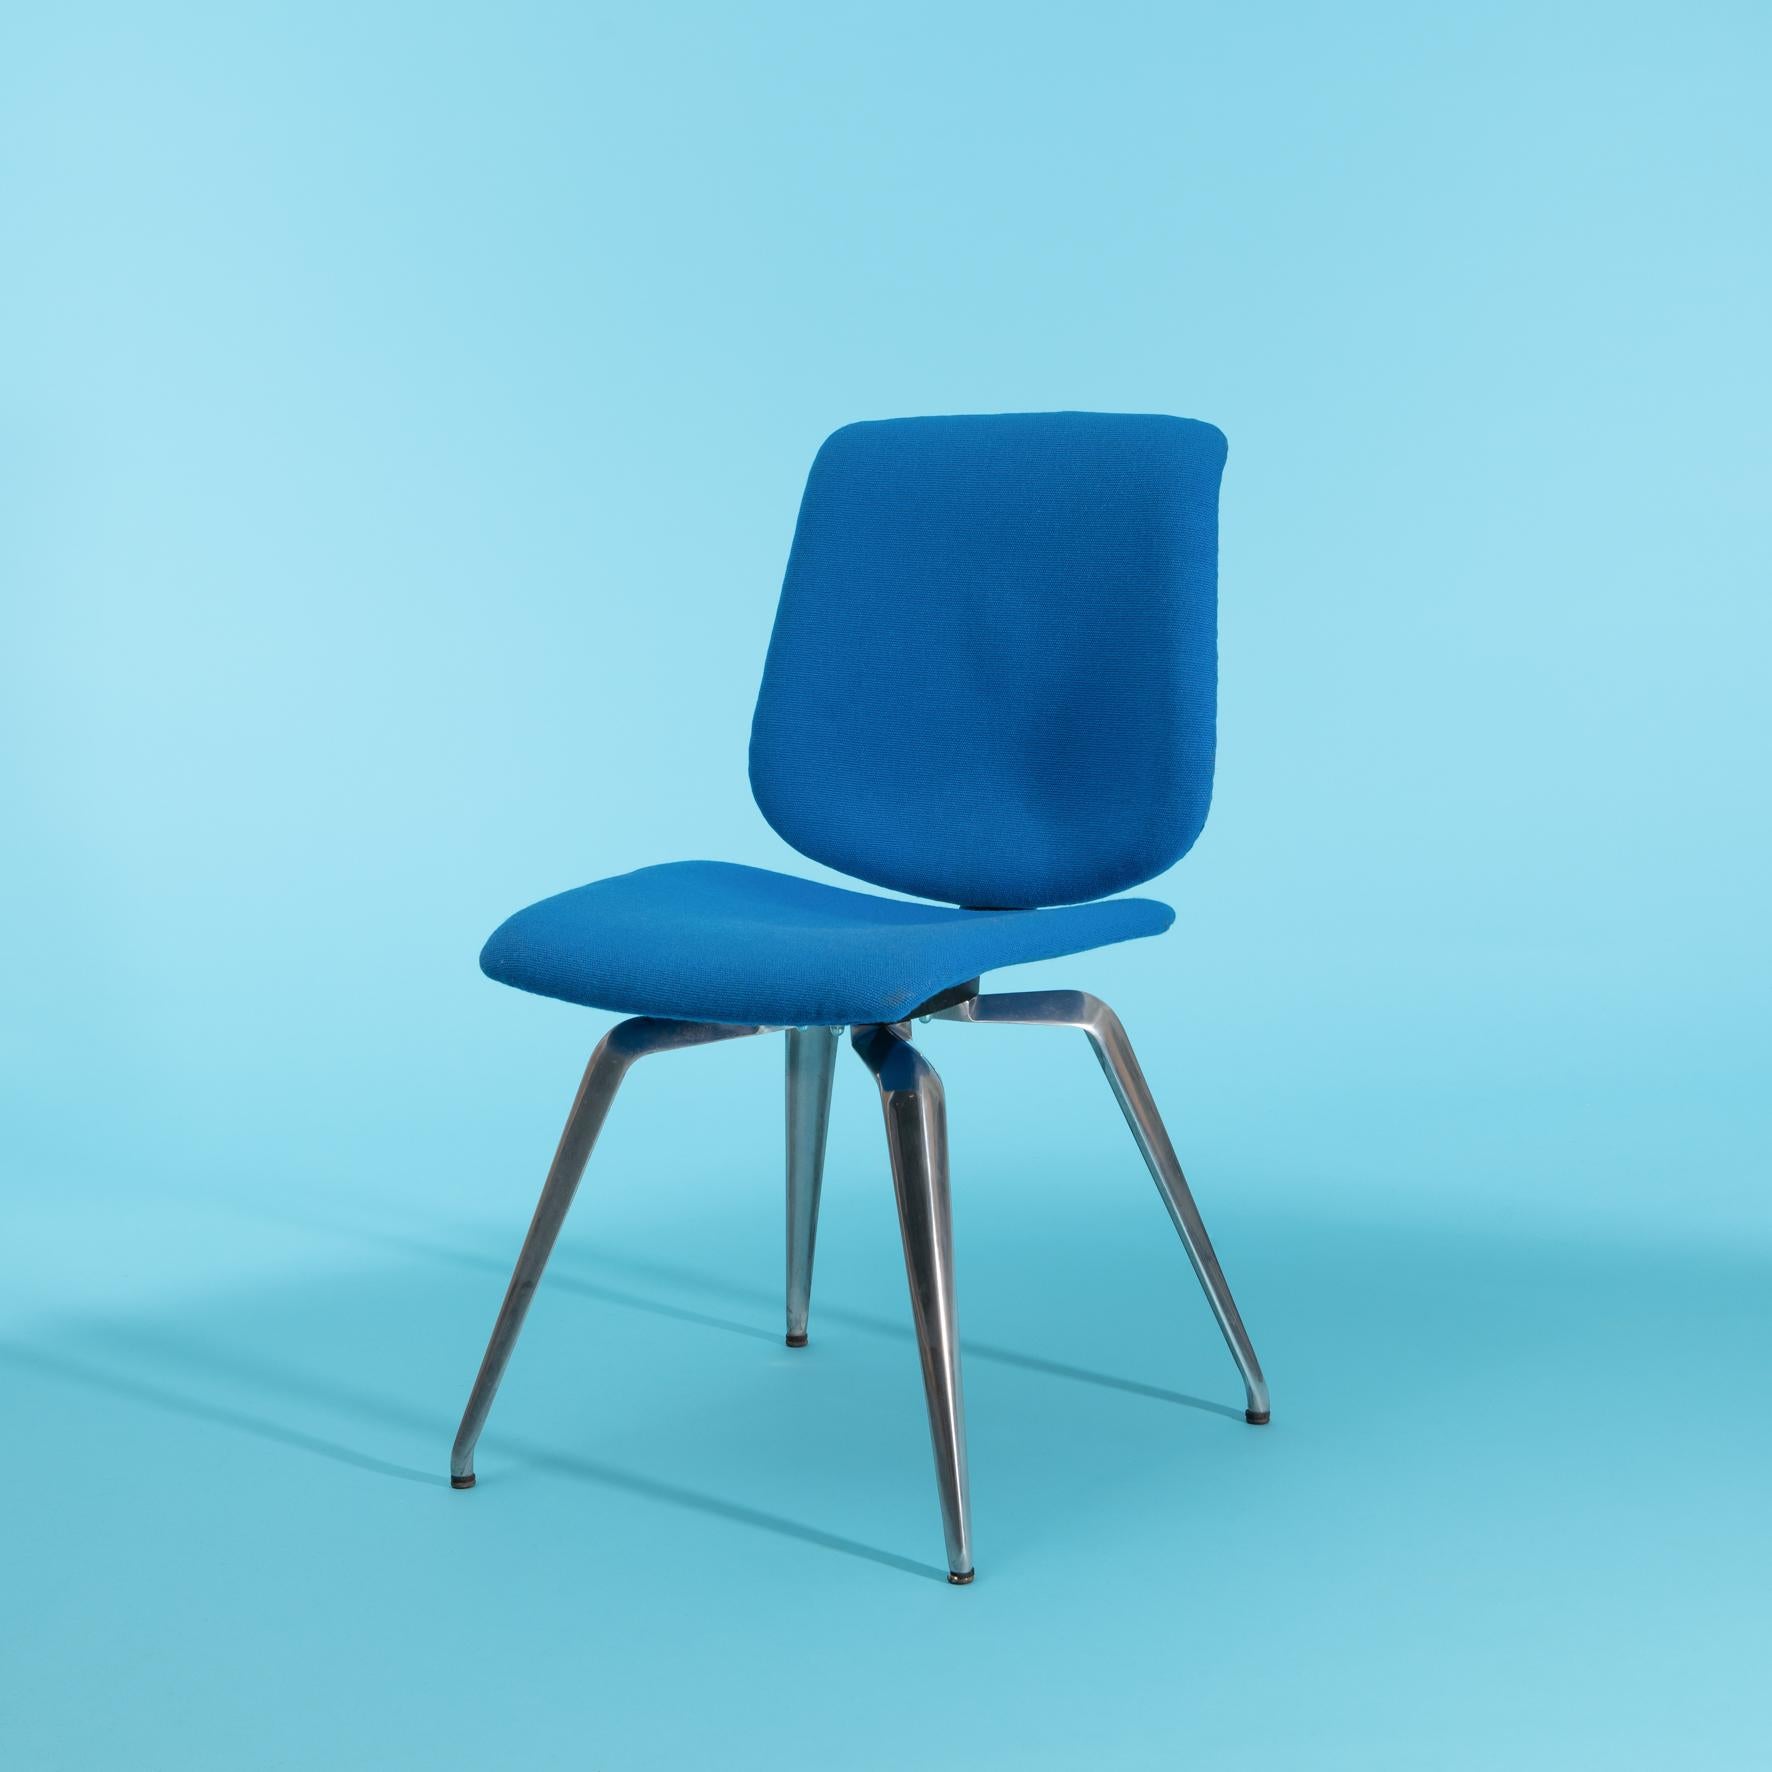 GAILLARD Claude
Compétition chair, TT2000 range, DMU éditeur, France, circa 1960

Polished cast aluminum, fiberglass seat and back, restored foam and fabric (choice of fabric)

Three available 
Price / piece (fabric included)

Literature: